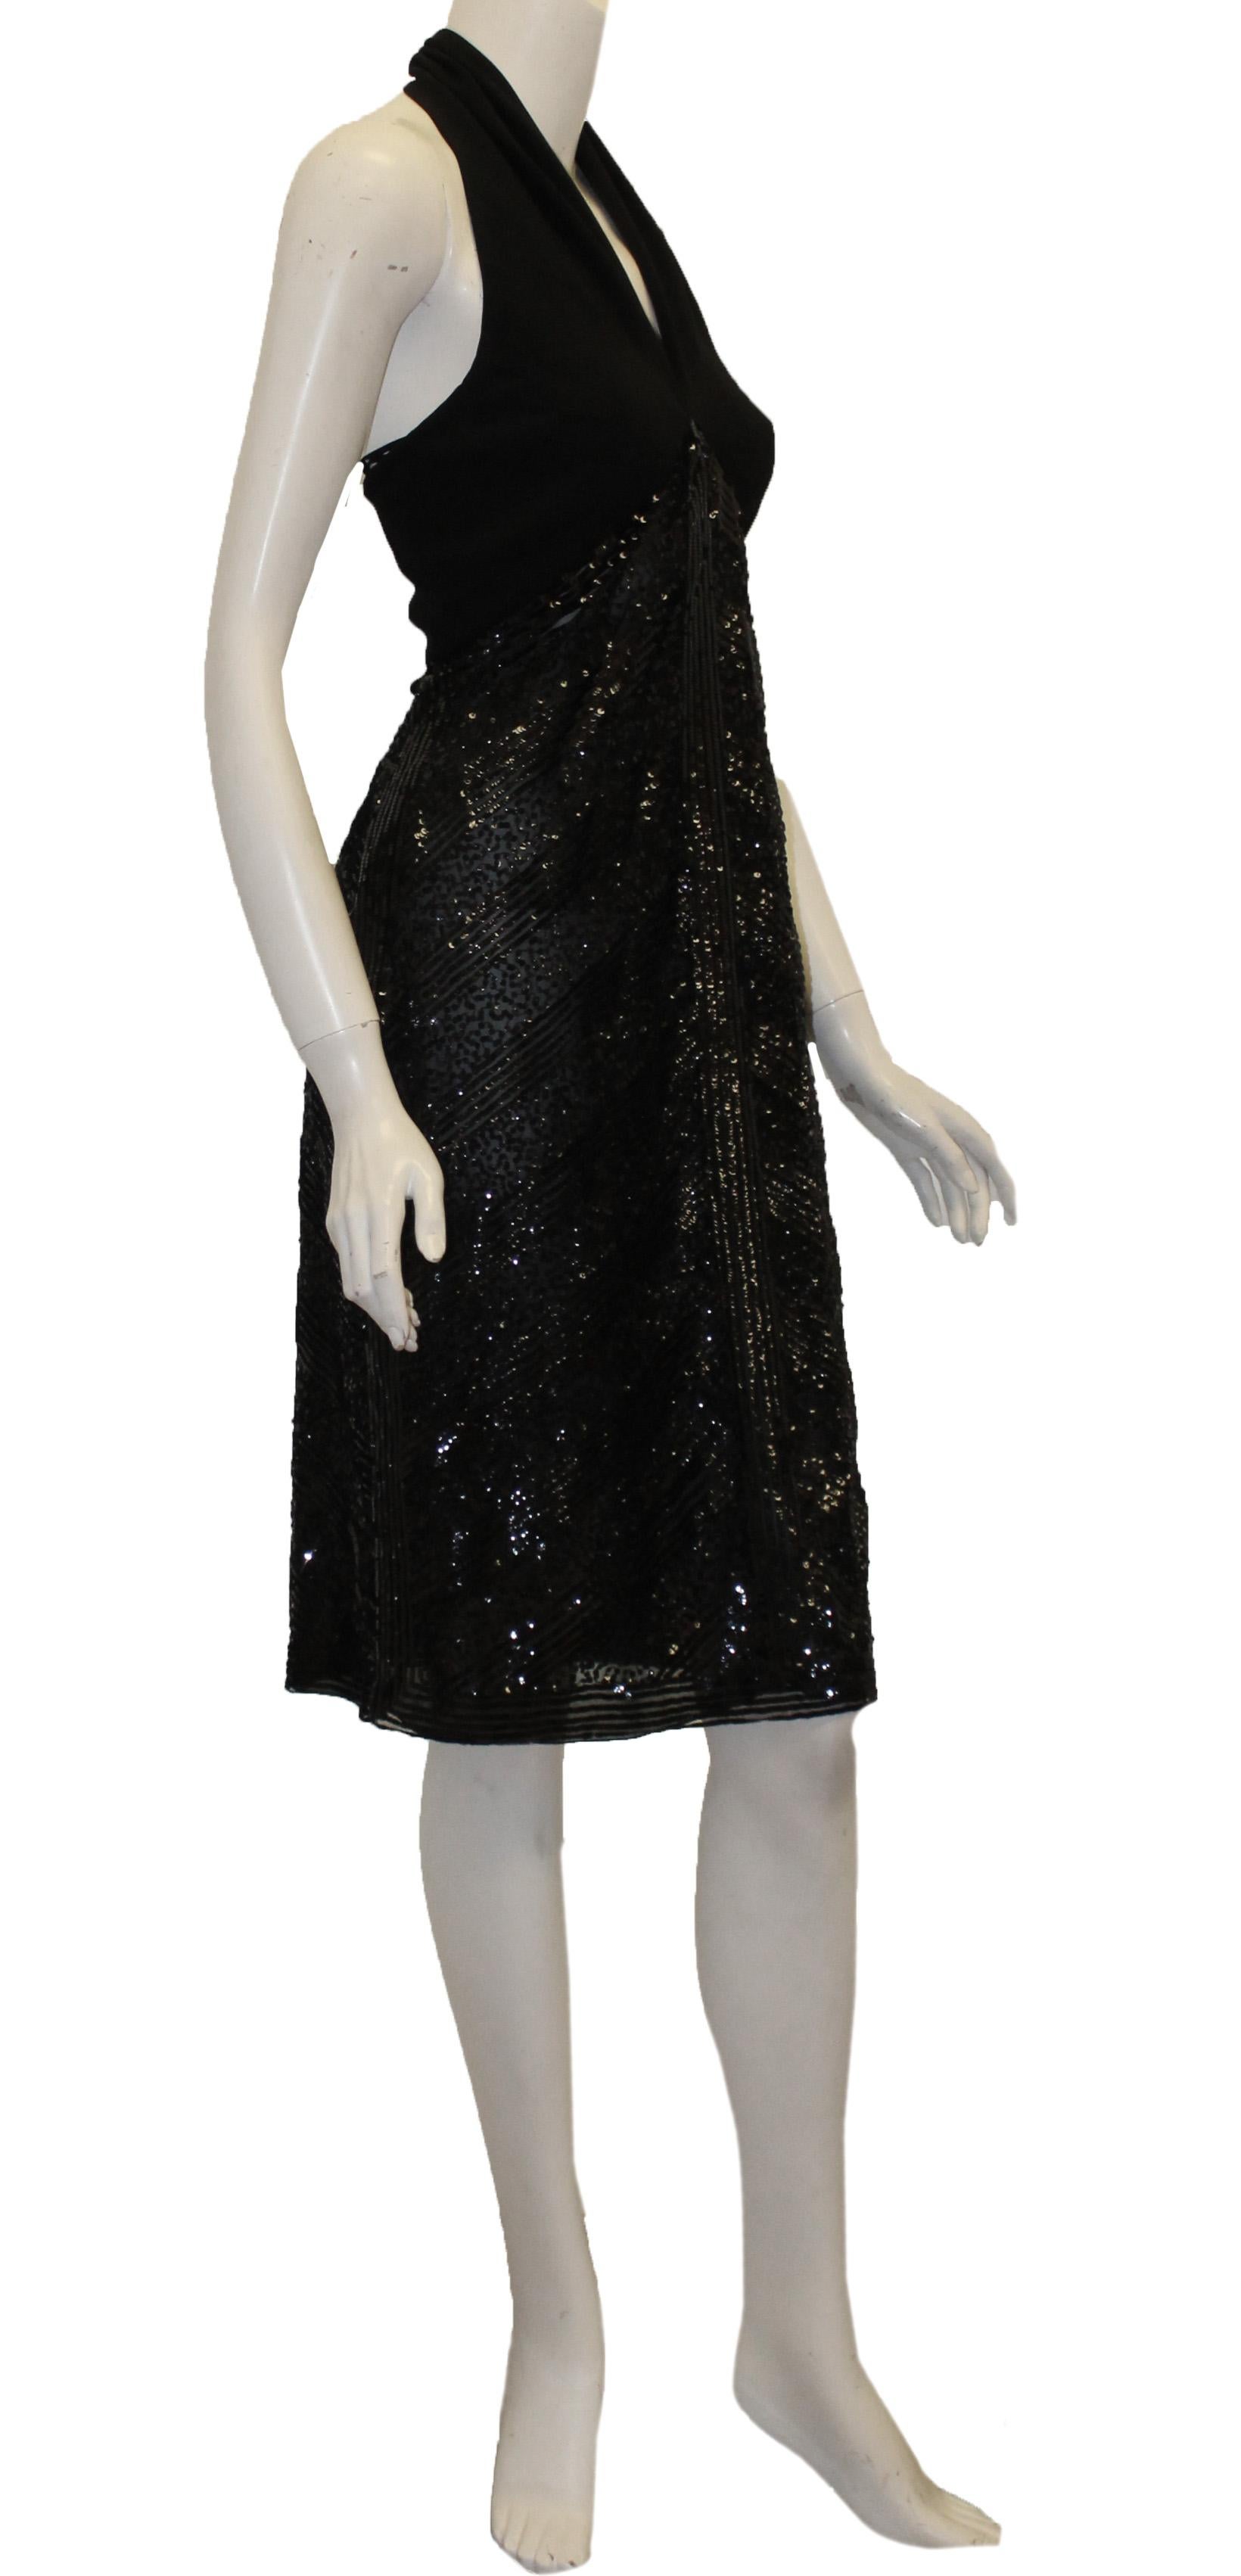 Valentino black halter cocktail sequined dress is accentuated by a plunging neckline and open back.  This dress is tied at back with 3 buttons at back of the neck.  Side zipper closure.  Sequin embroidery features abstract chevron design both at